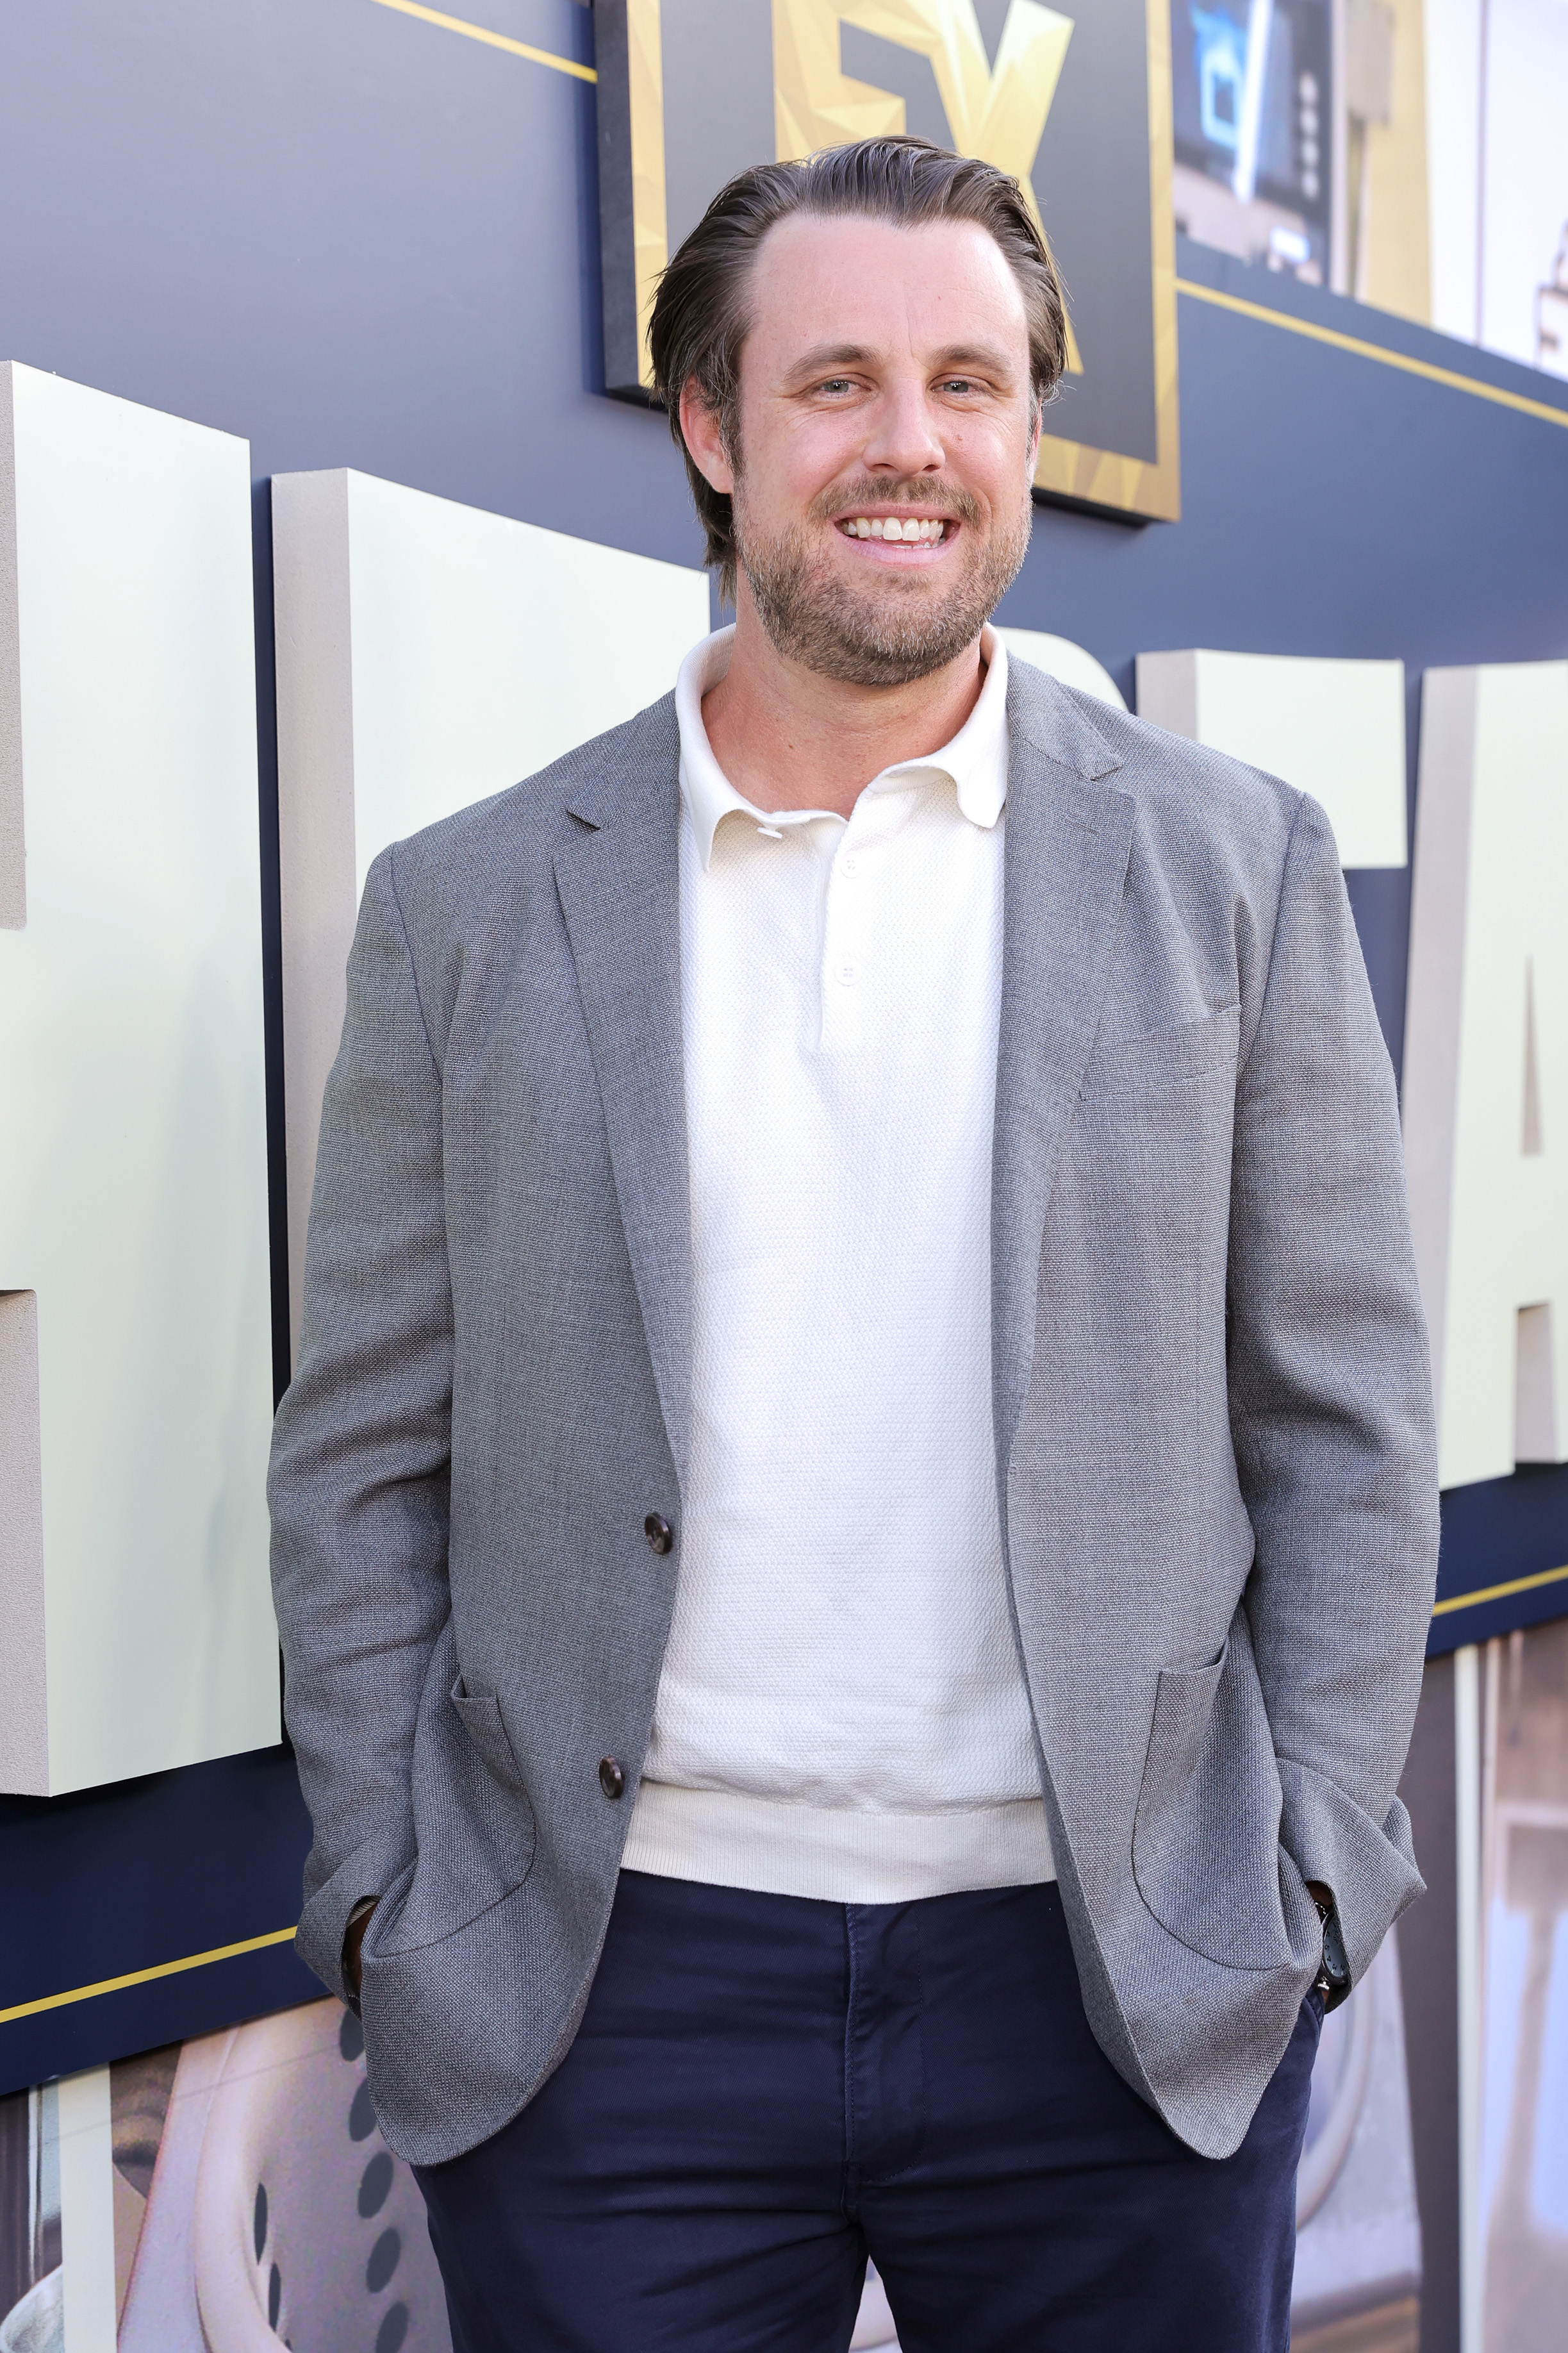 Chris Witaske on the red carpet wearing a blazer, polo short, and slacks. He smiles at the camera while he stands with his hands in his pockets